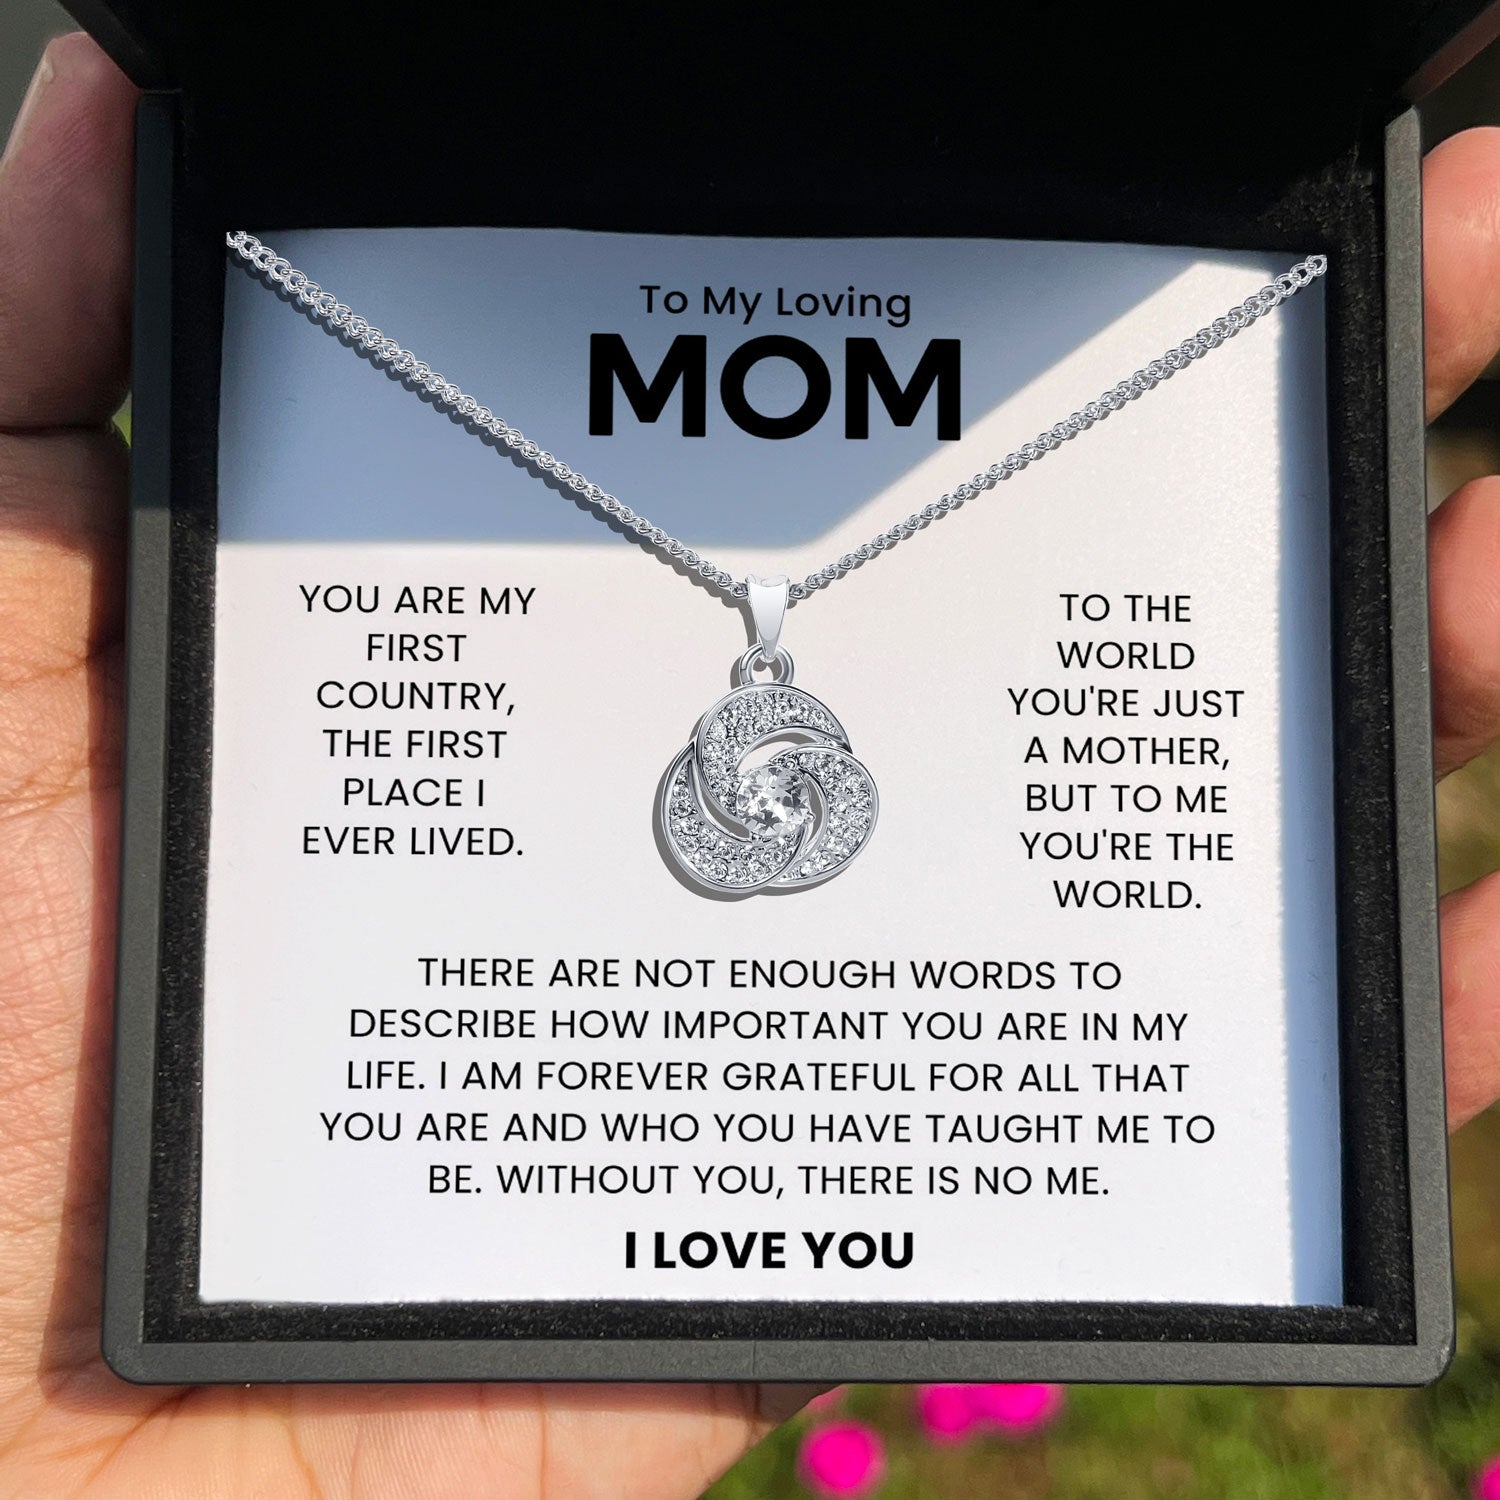 To My Loving Mom - To Me You're The World - Tryndi Love Knot Necklace